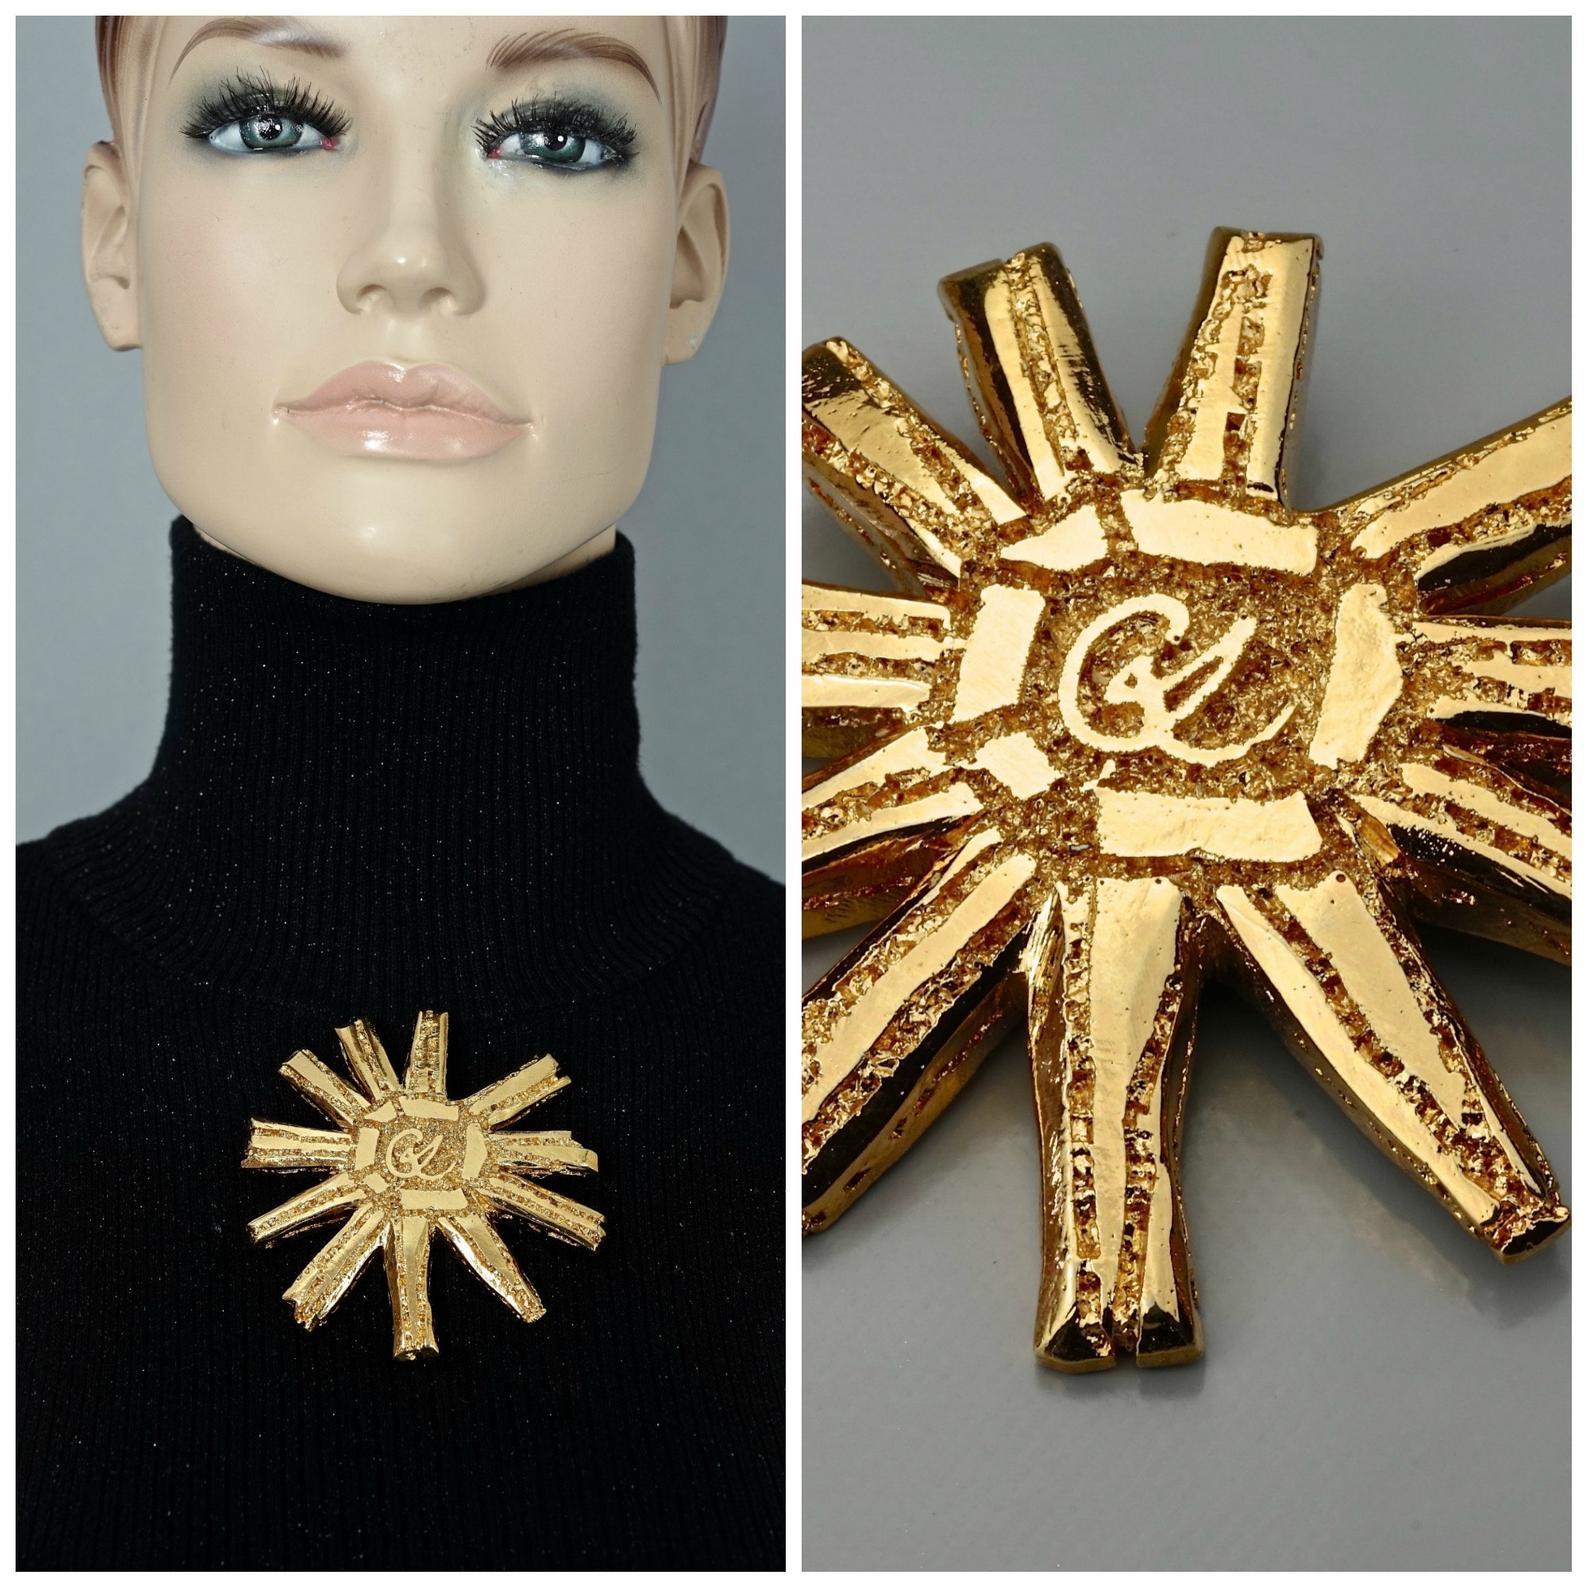 Vintage Massive CHRISTIAN LACROIX Logo Sun Brooch

Measurements:
Height: 3.15 inches (8 cm)
Width: 3.15 inches (8 cm)

Features:
- 100% Authentic CHRISTIAN LACROIX.
- Huge lightweight sun brooch.
- CL logo at the center.
- Gold tone.
- Signed